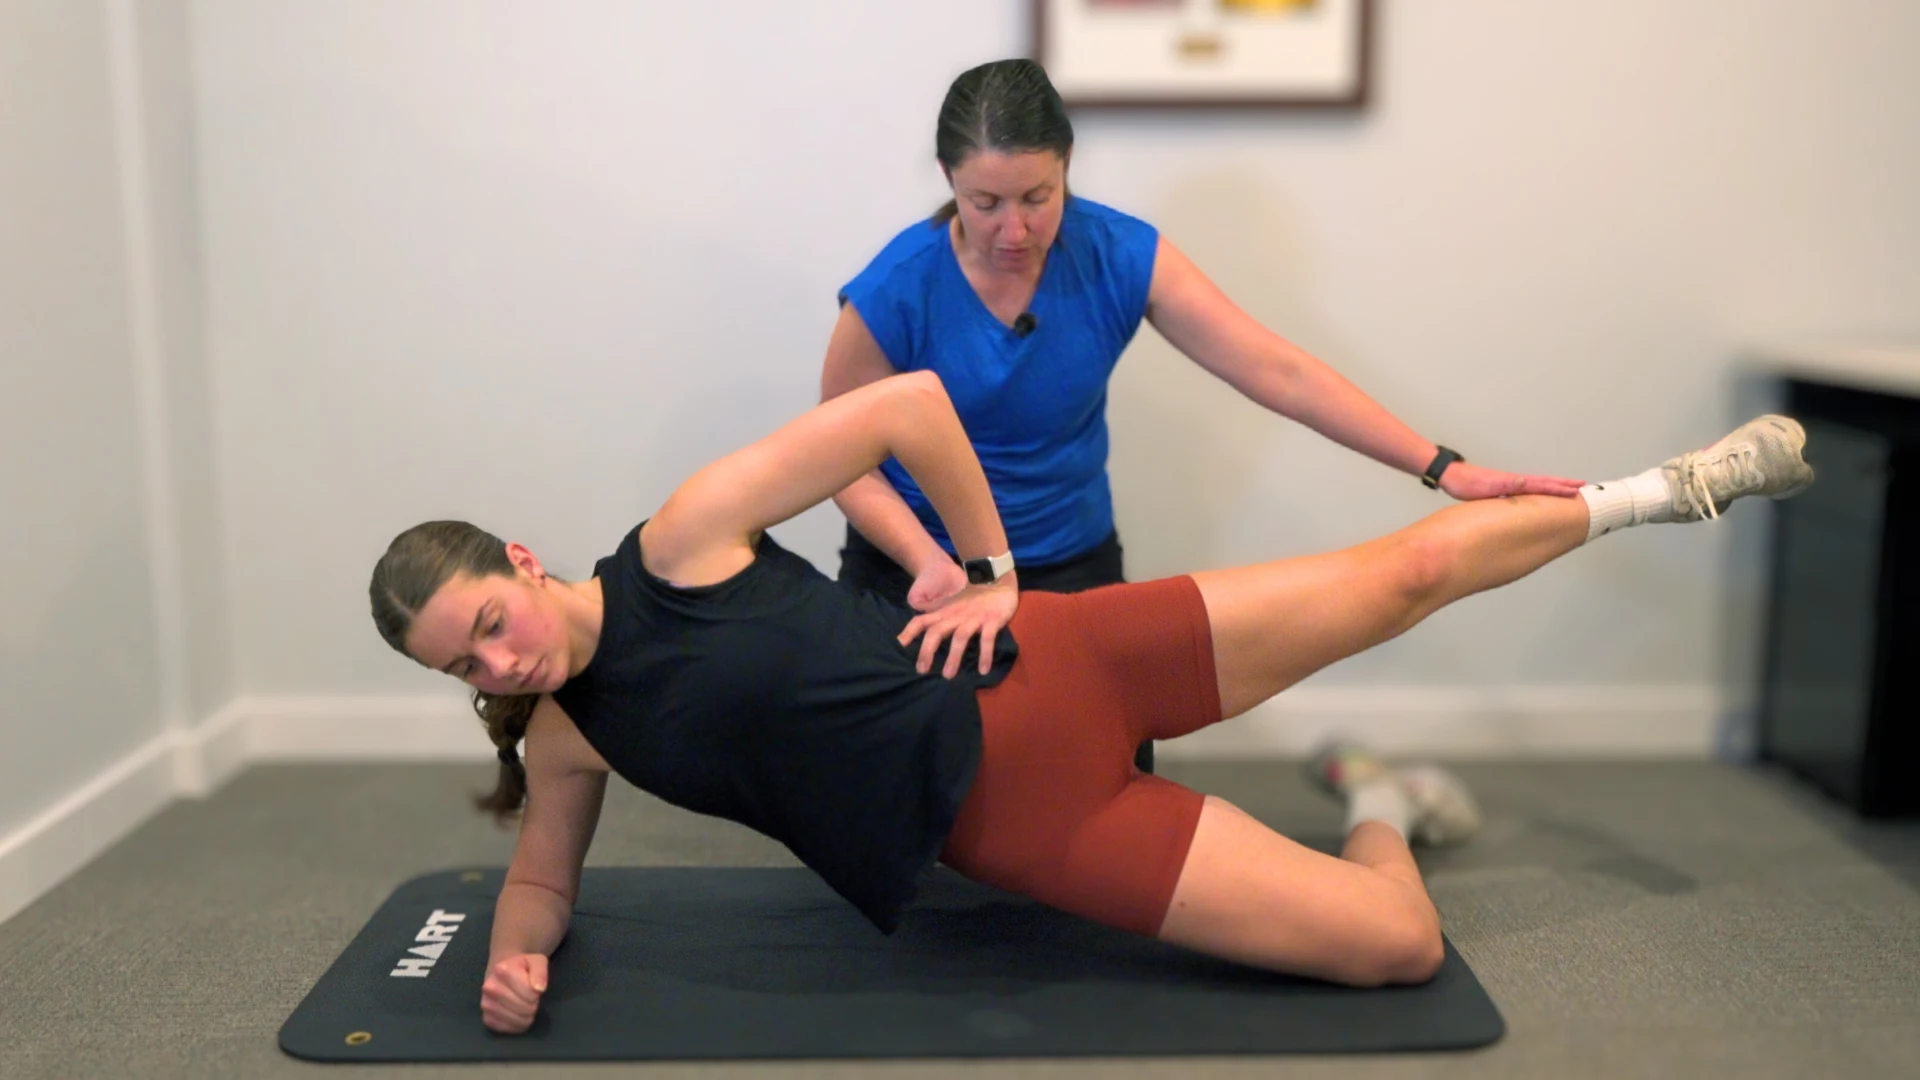 15. Strength and endurance tests in low back pain patients. Part 2 with Paula Peralta